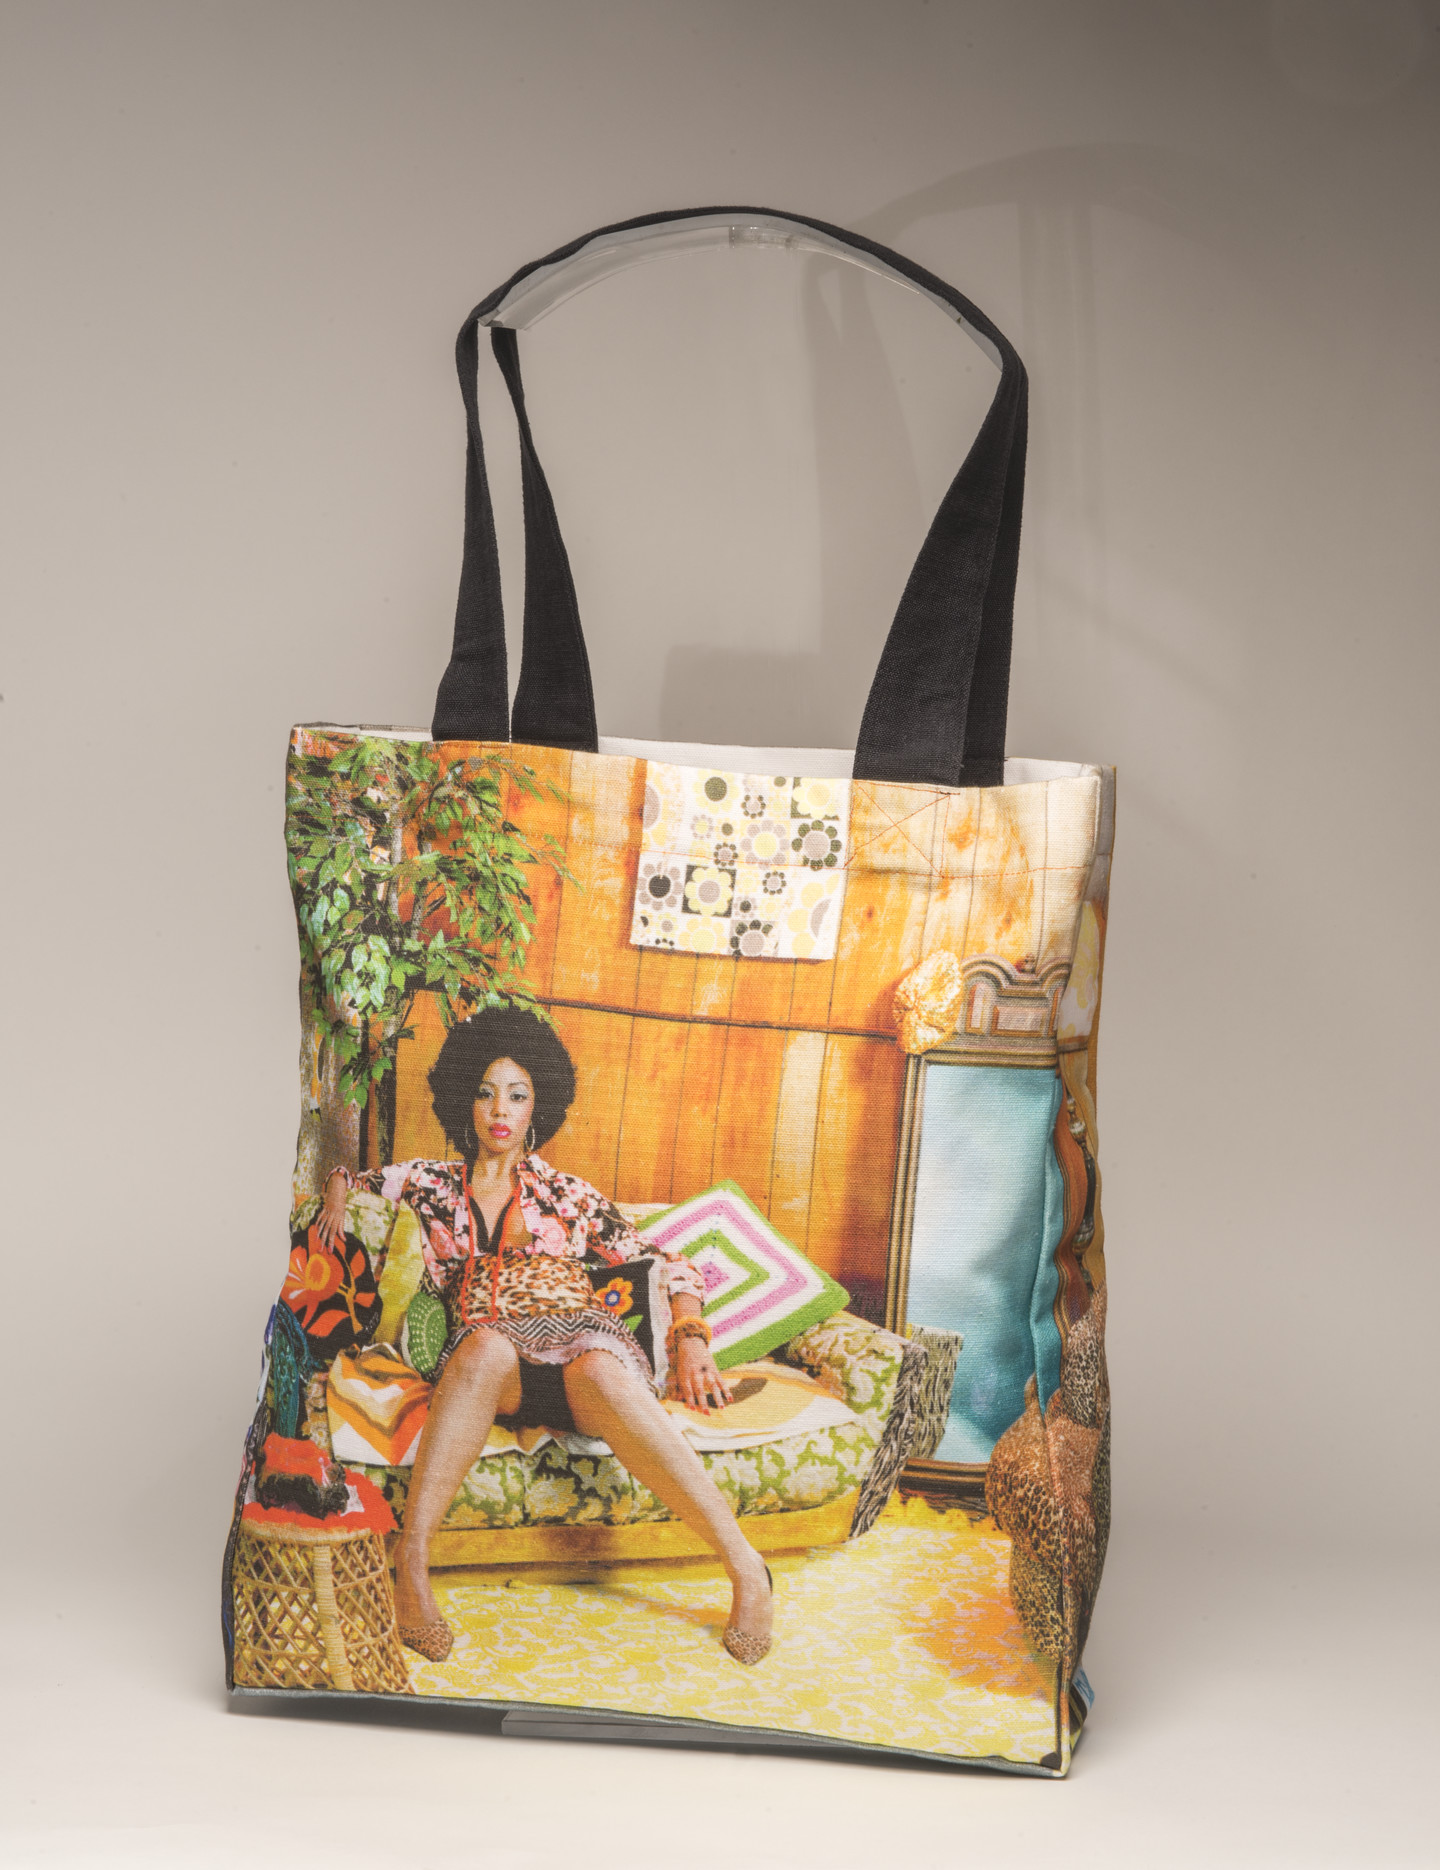 A tote bag with a photograph of a woman with a dark skin tone sitting on a sofa.